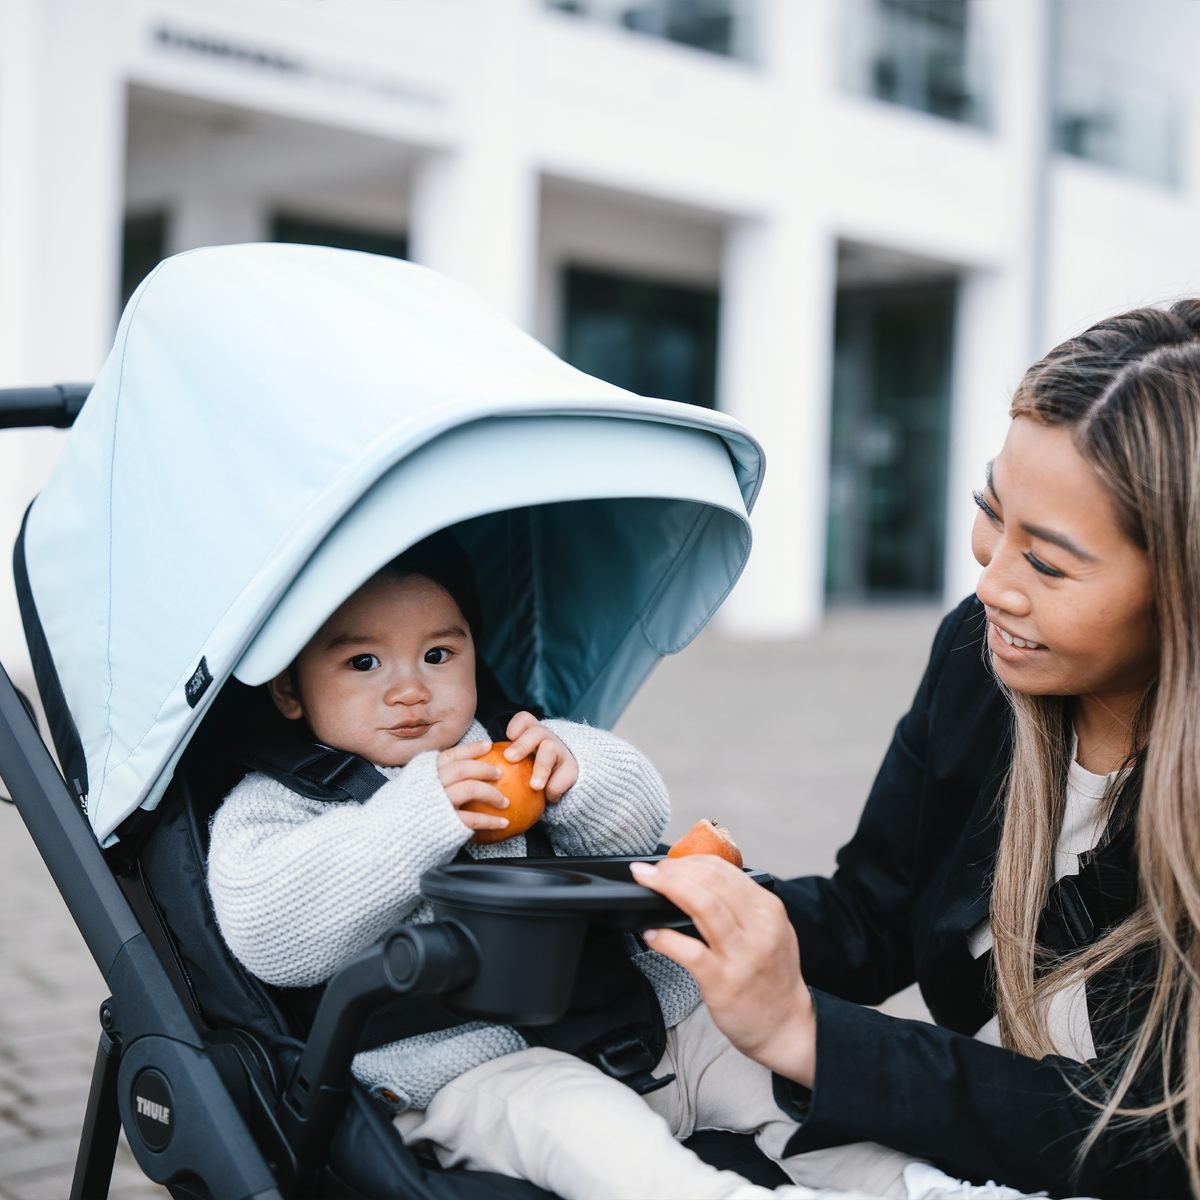 A woman smiles at her baby in a stroller holding an orange placed on the Thule Stroller Snack Tray.